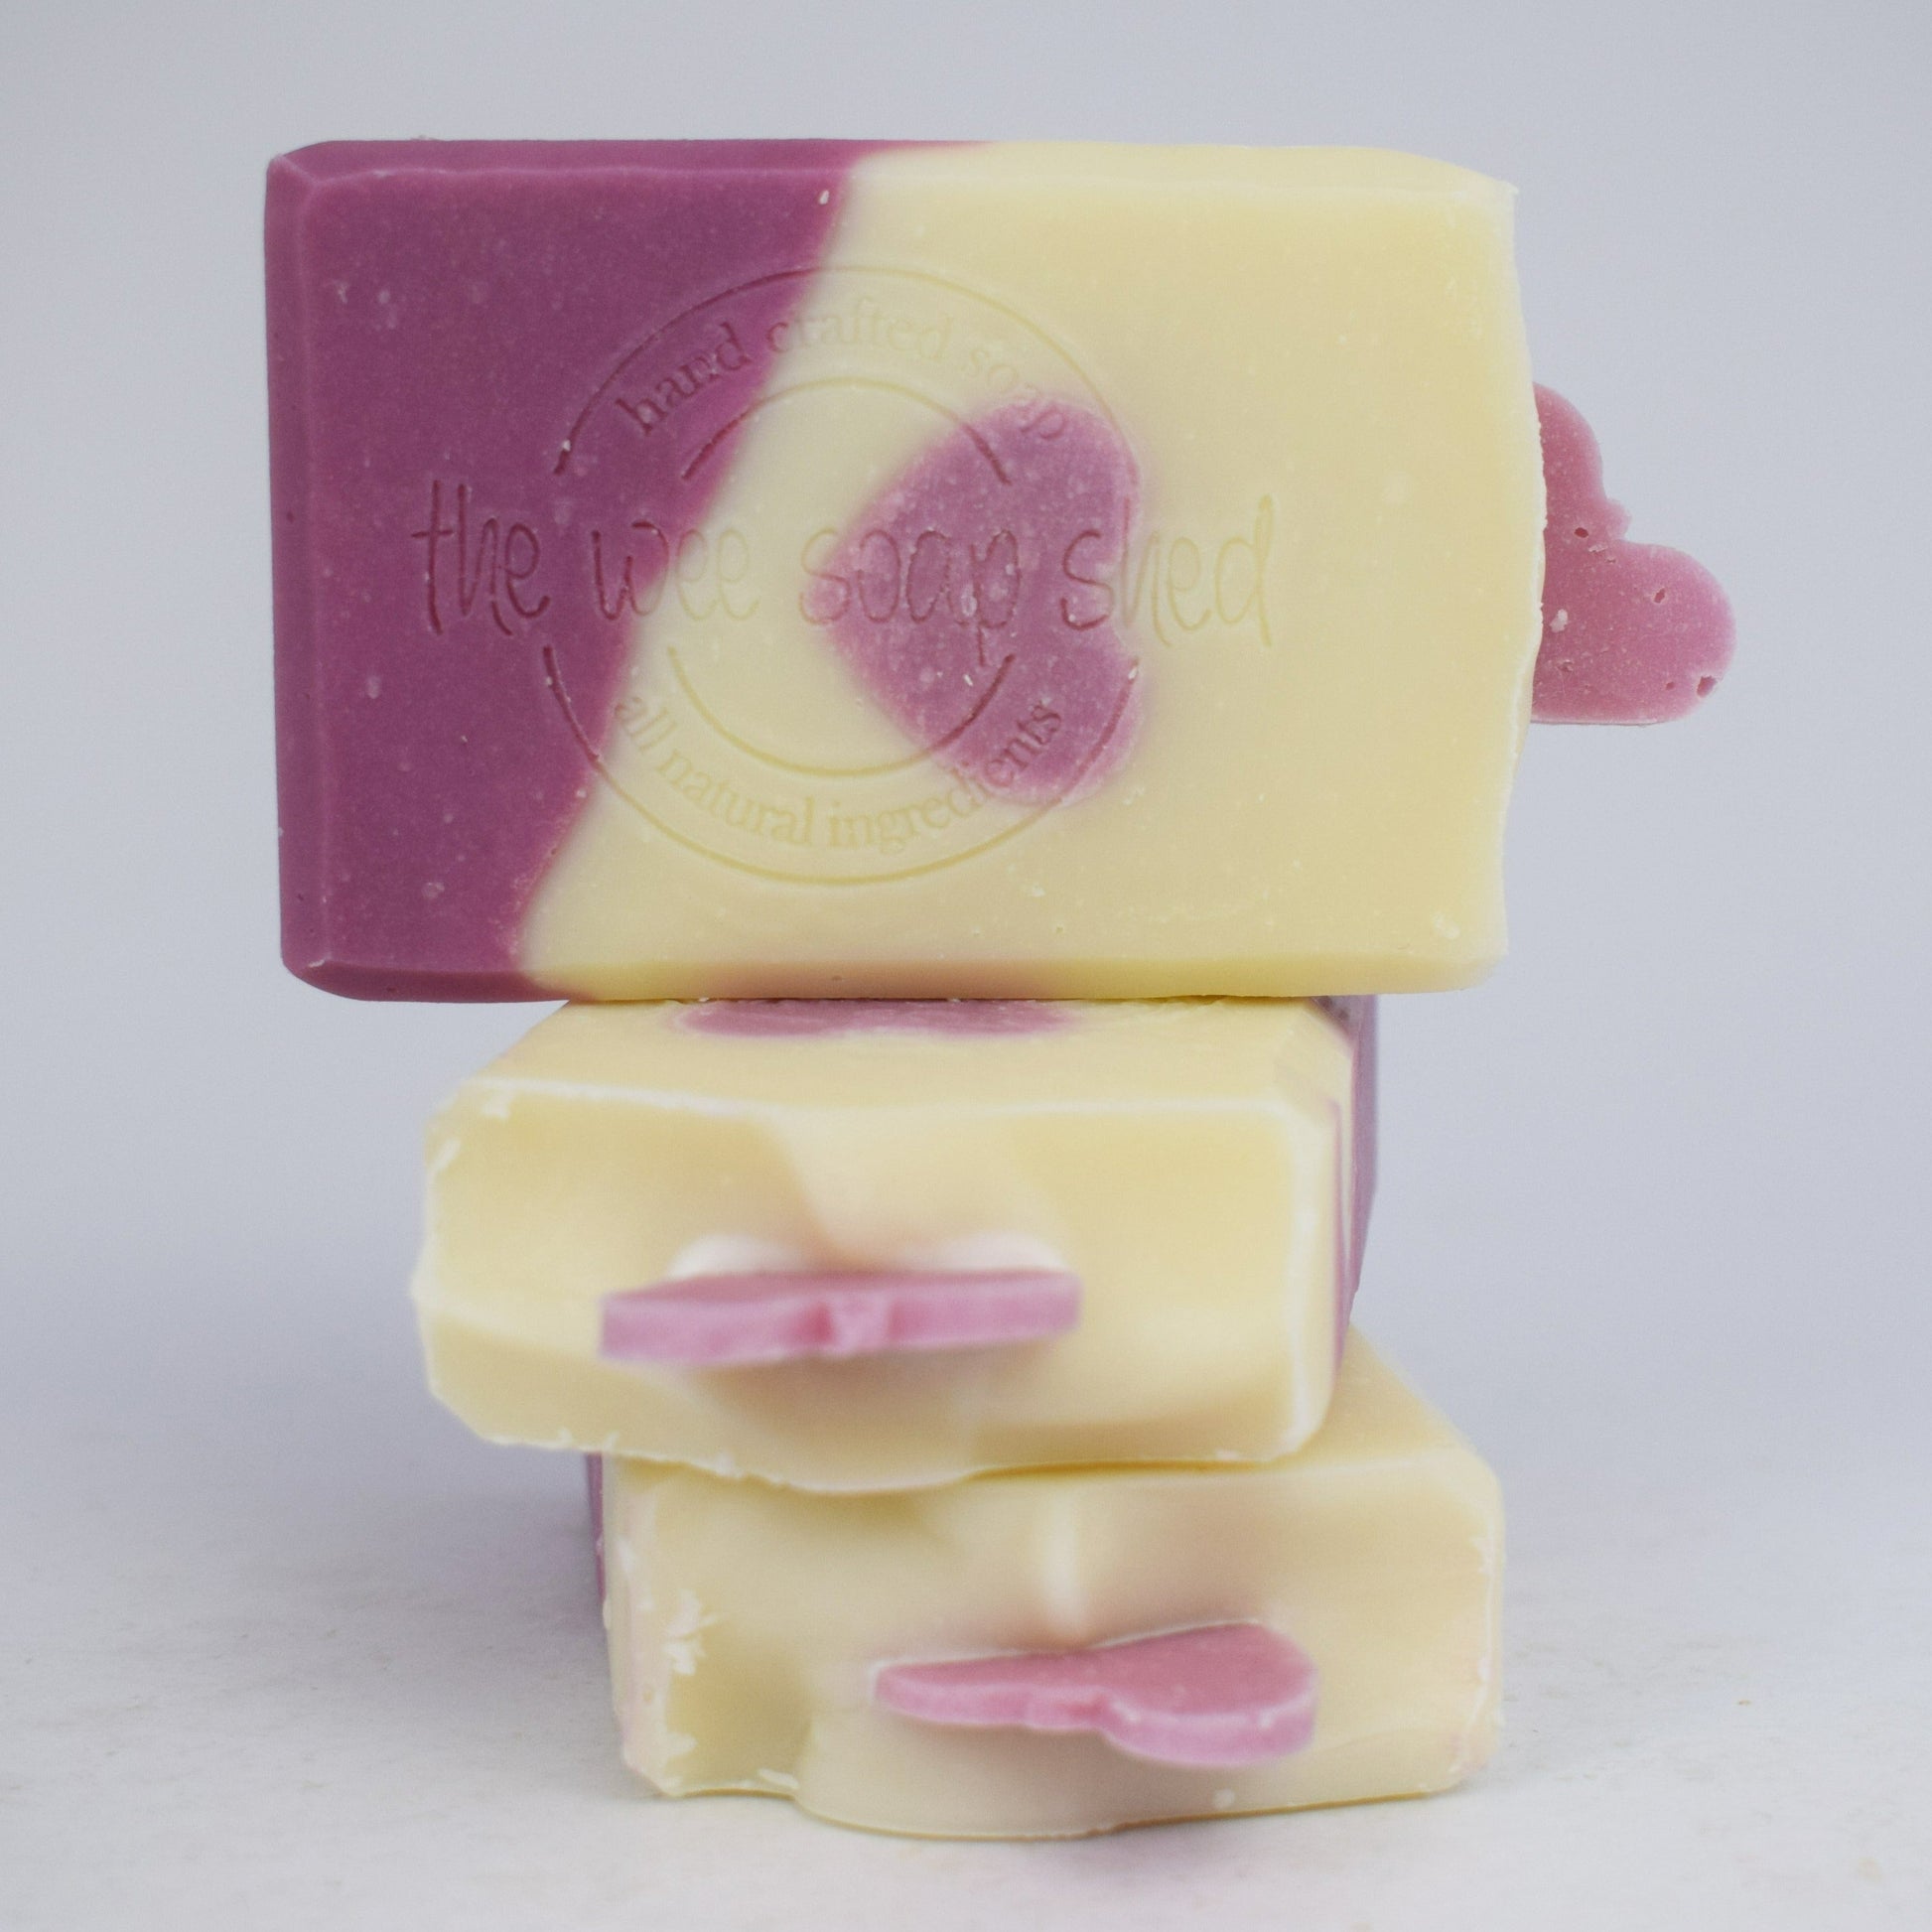 The Wee Soap Shed - Loving Me. Our special edition Valentine soap scented with bergamot & pink grapefruit essential oils